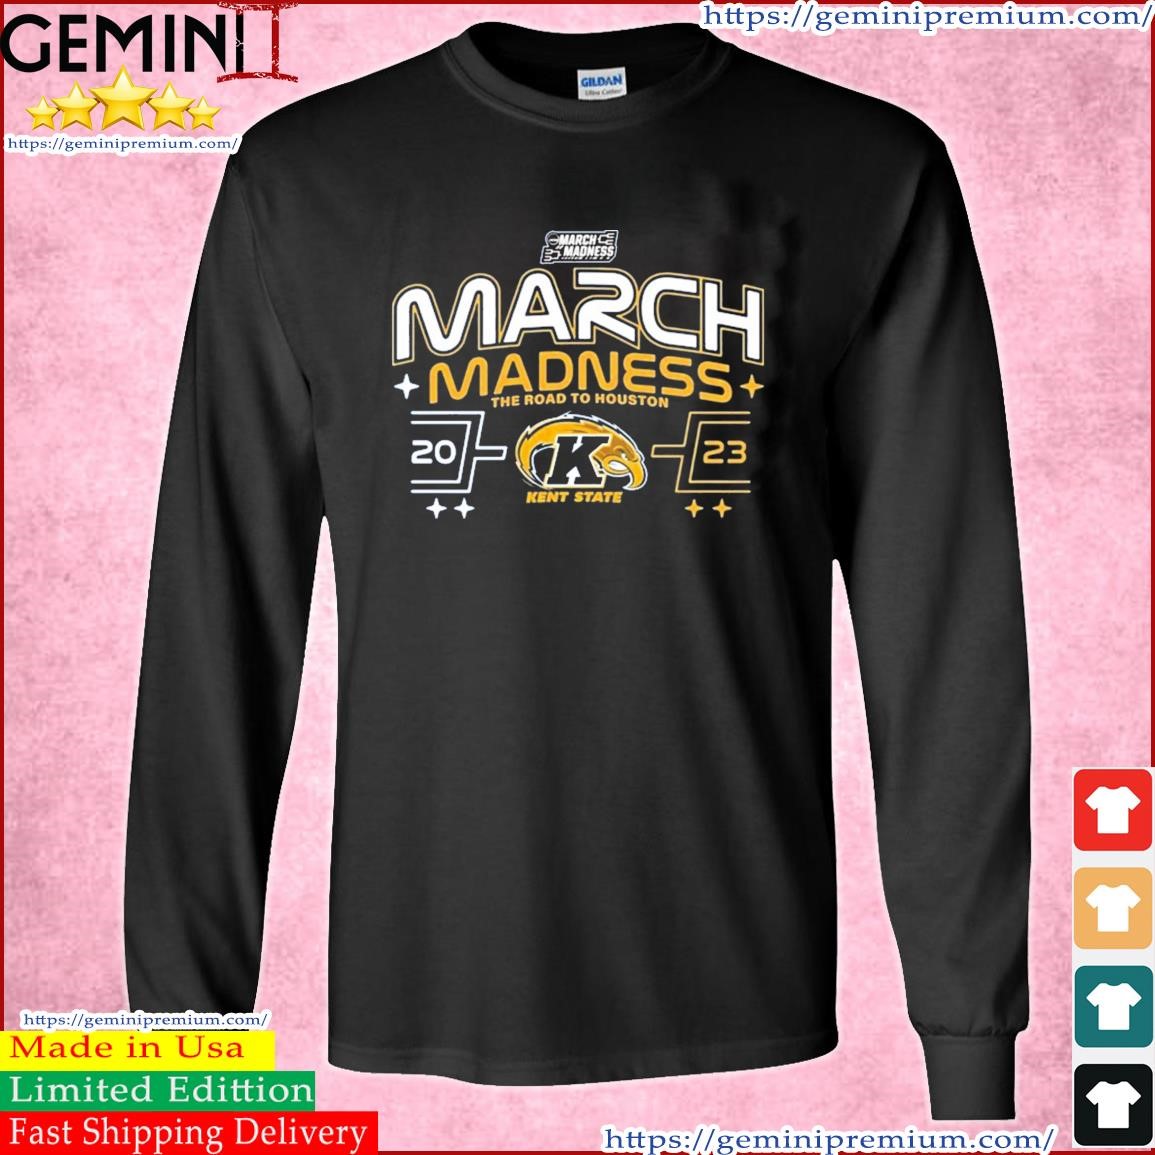 Kent State Men's Basketball 2023 NCAA March Madness The Road To Houston Shirt Long Sleeve Tee.jpg